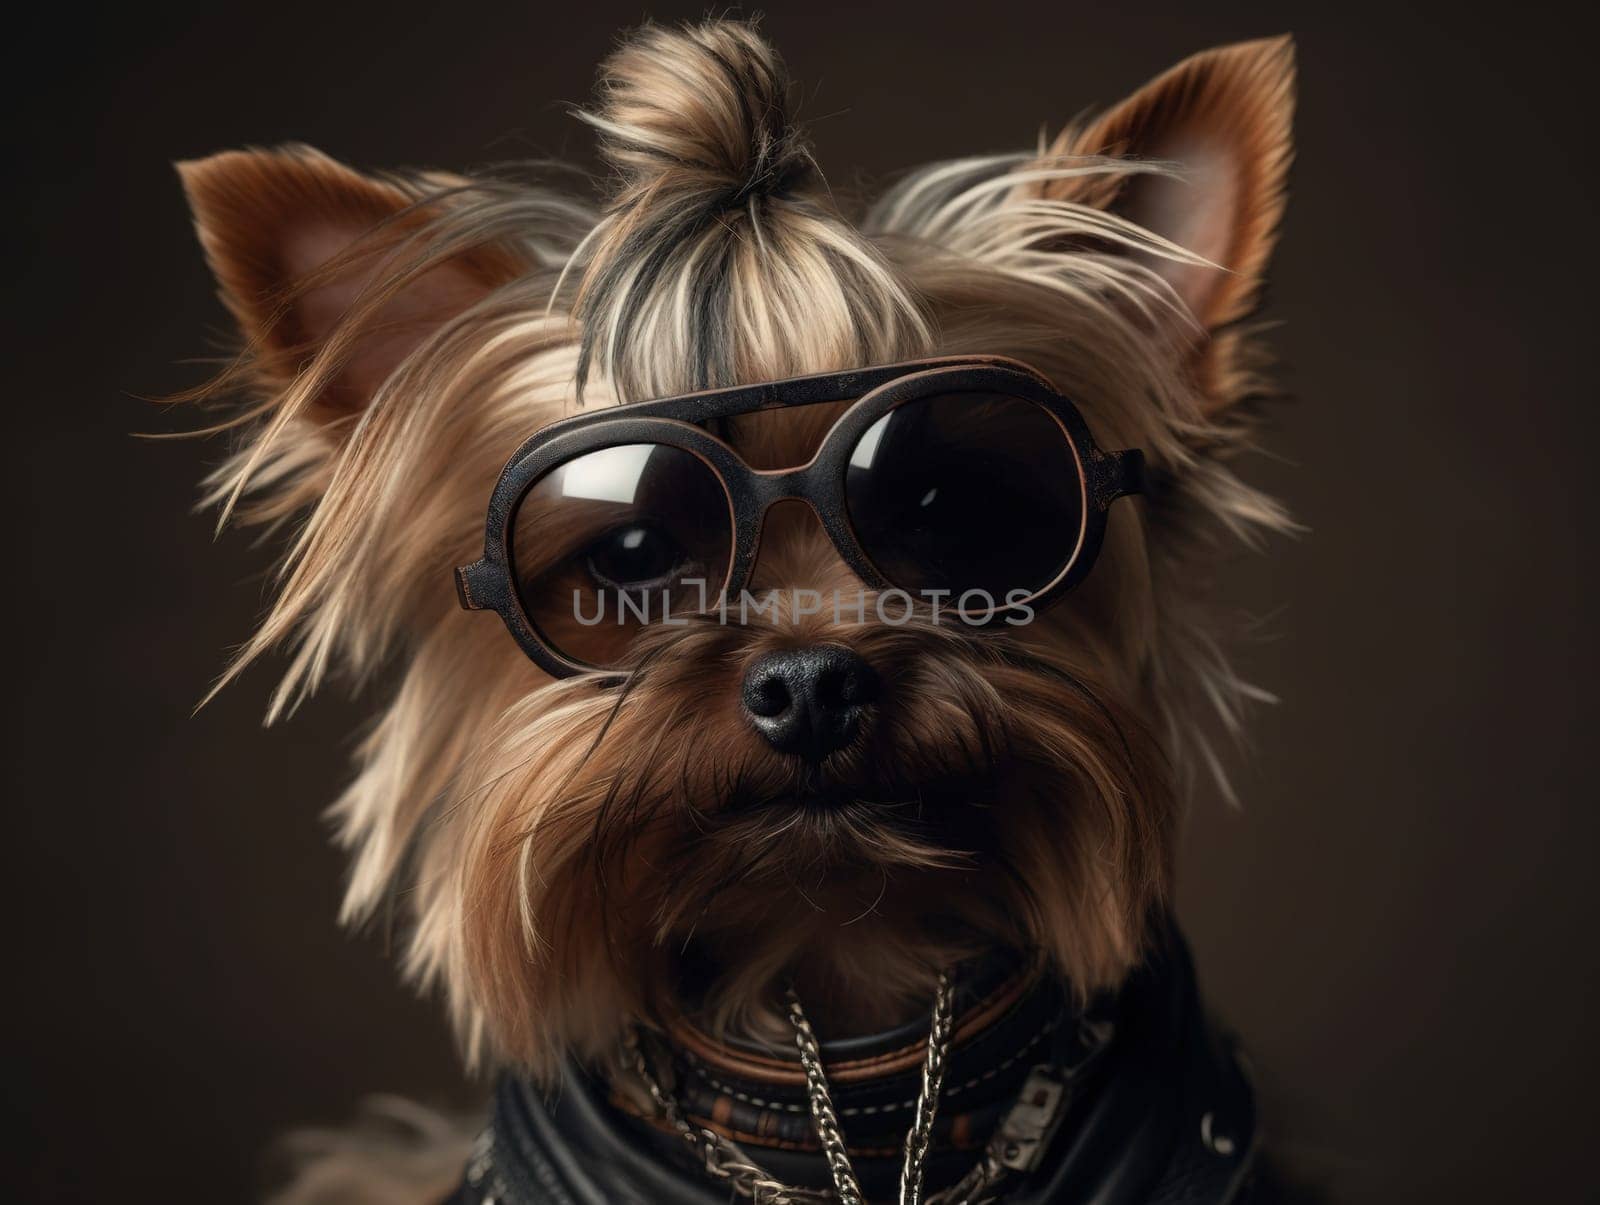 Humorous Yorkshire Terrier In Sunglasses Dressed As A Rock Star